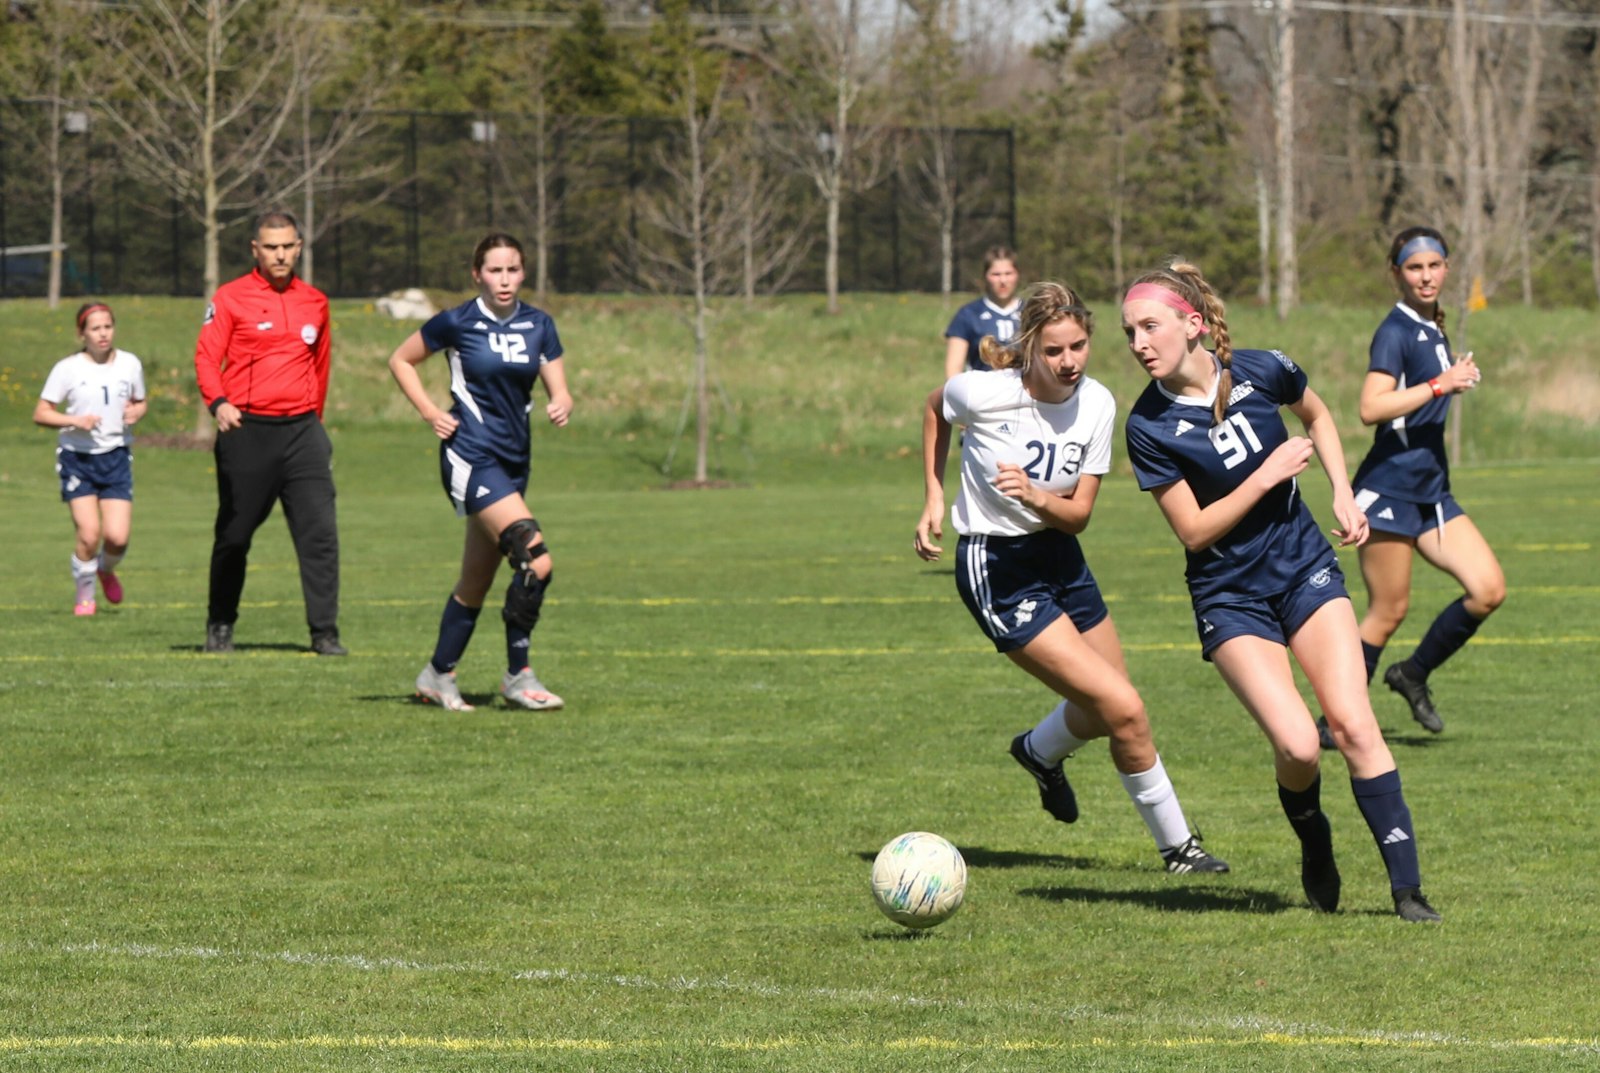 Senior Morgan McNally looks to pass to an open Sacred Heart teammate. McNally was a team captain on the cooperative Sacred Heart-Clarkston Everest Collegiate squad which fell to Kalamazoo Christian in last spring’s Division 4 state championship contest.